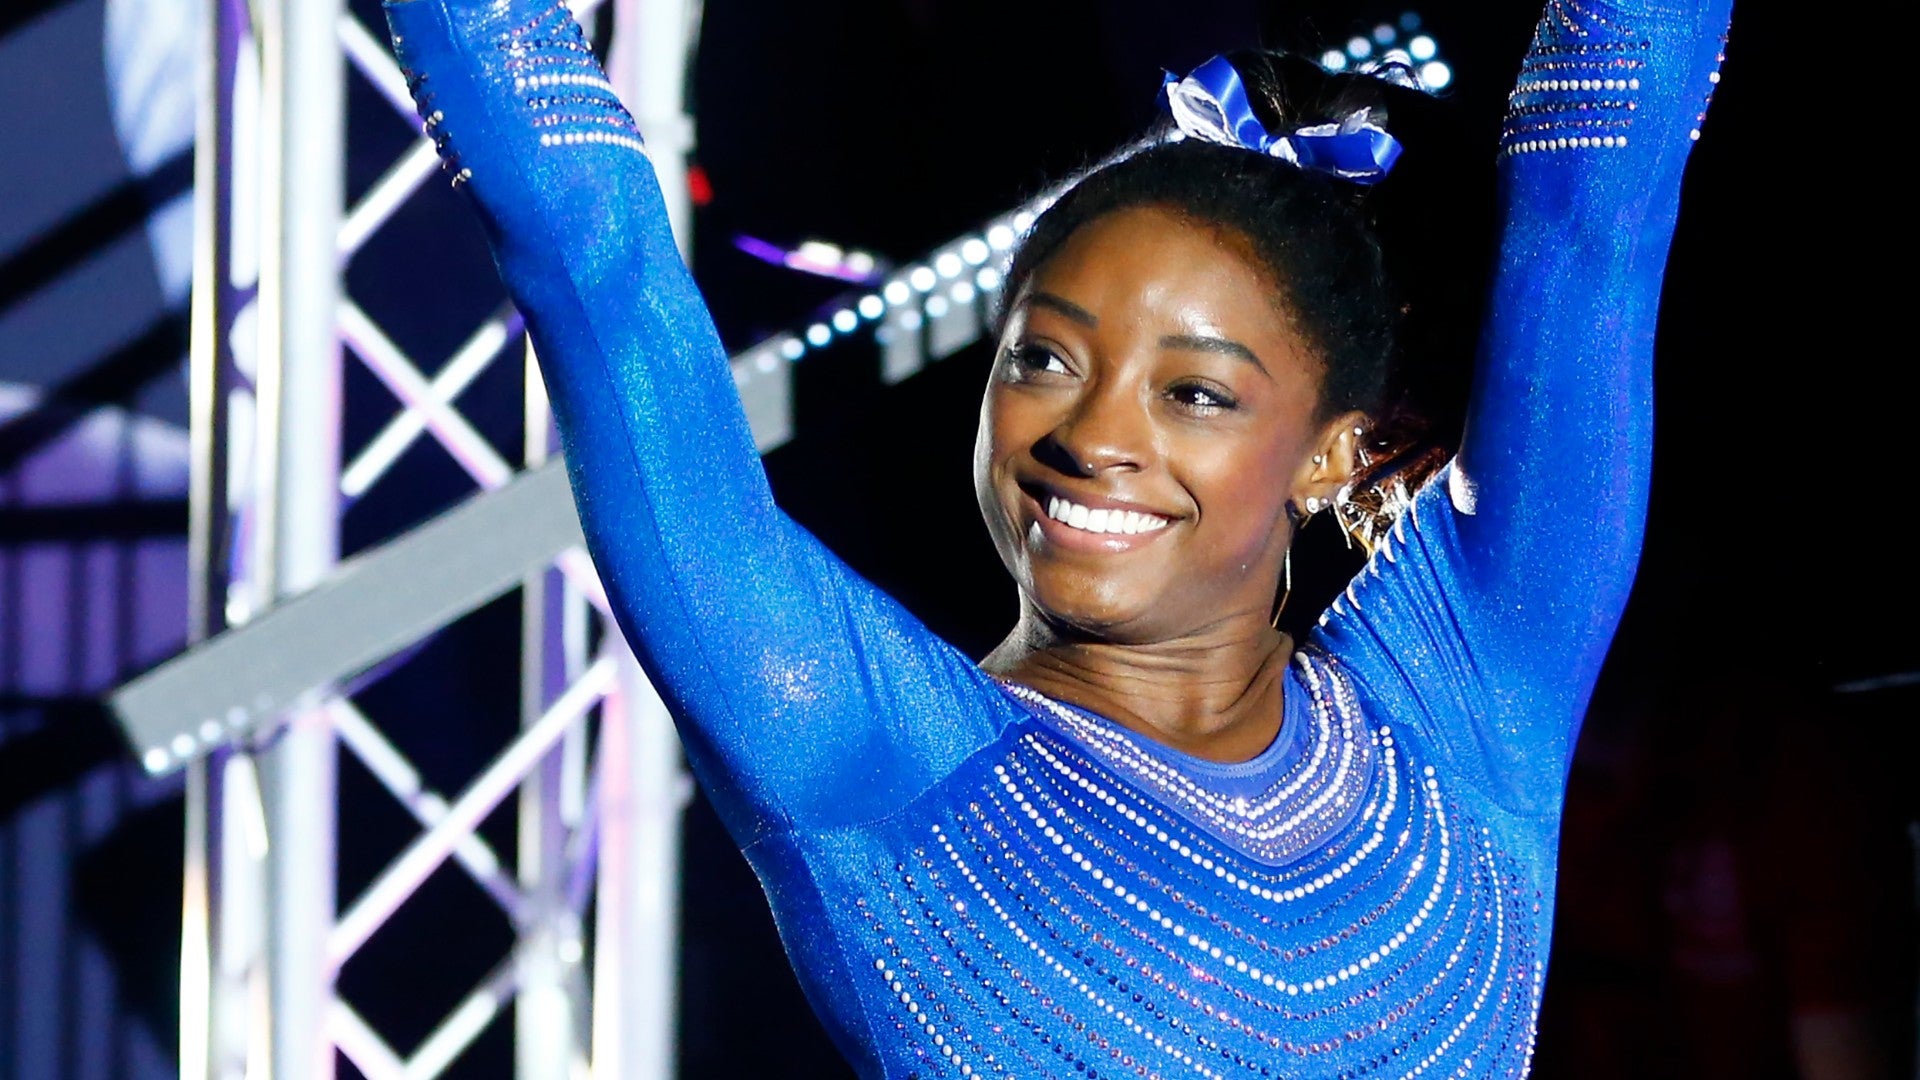 Simone Biles Goes For Gold Eyeshadow At U.S. Championships